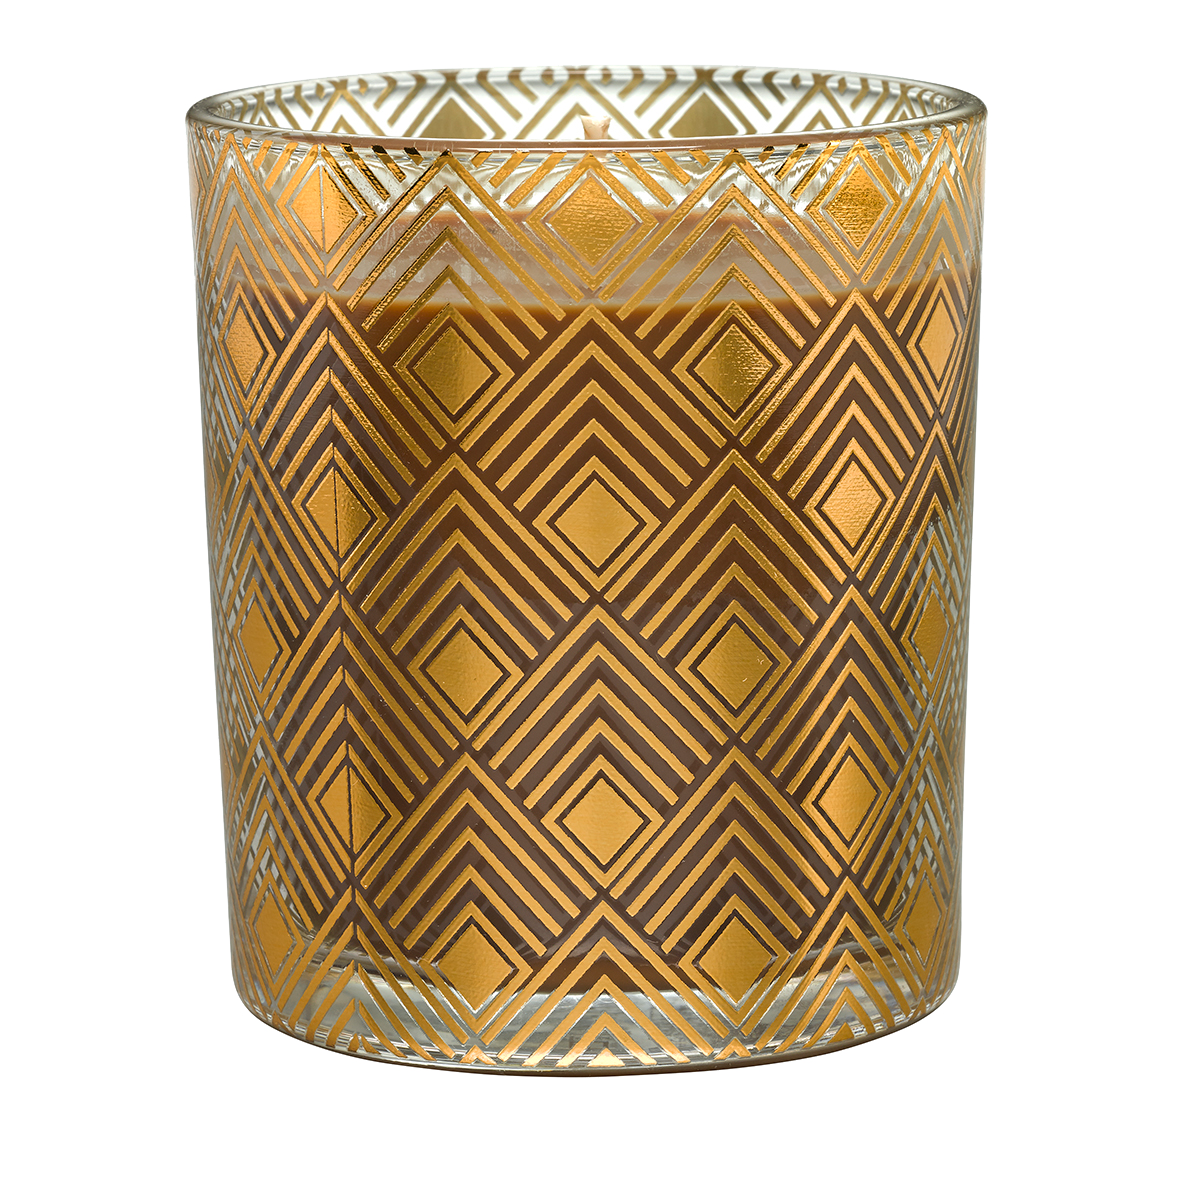 After Dark™ Amber Suede Scented Jar Candle - PartyLite US